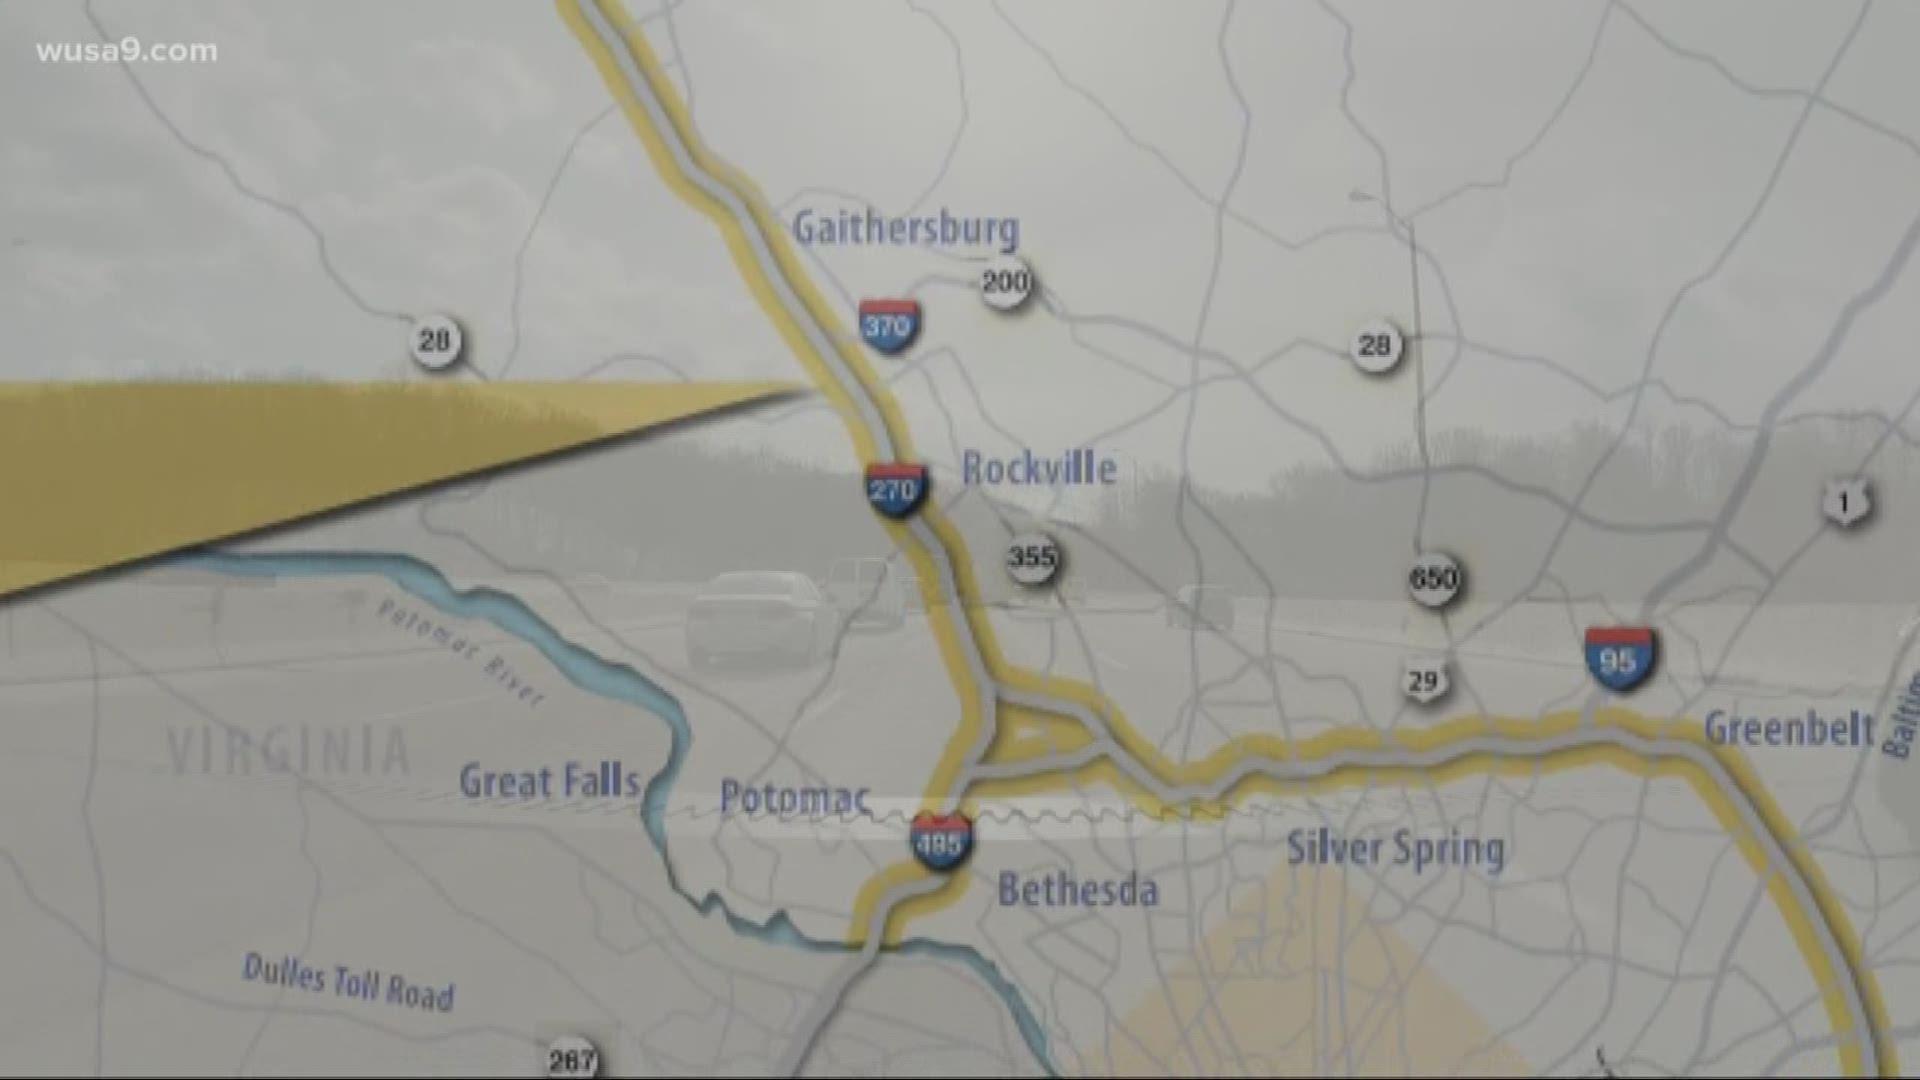 The bridge is the region's worst choke point. With Virginia building new HOT lanes, Maryland promises a public-private partnership will connect them to new bridge.